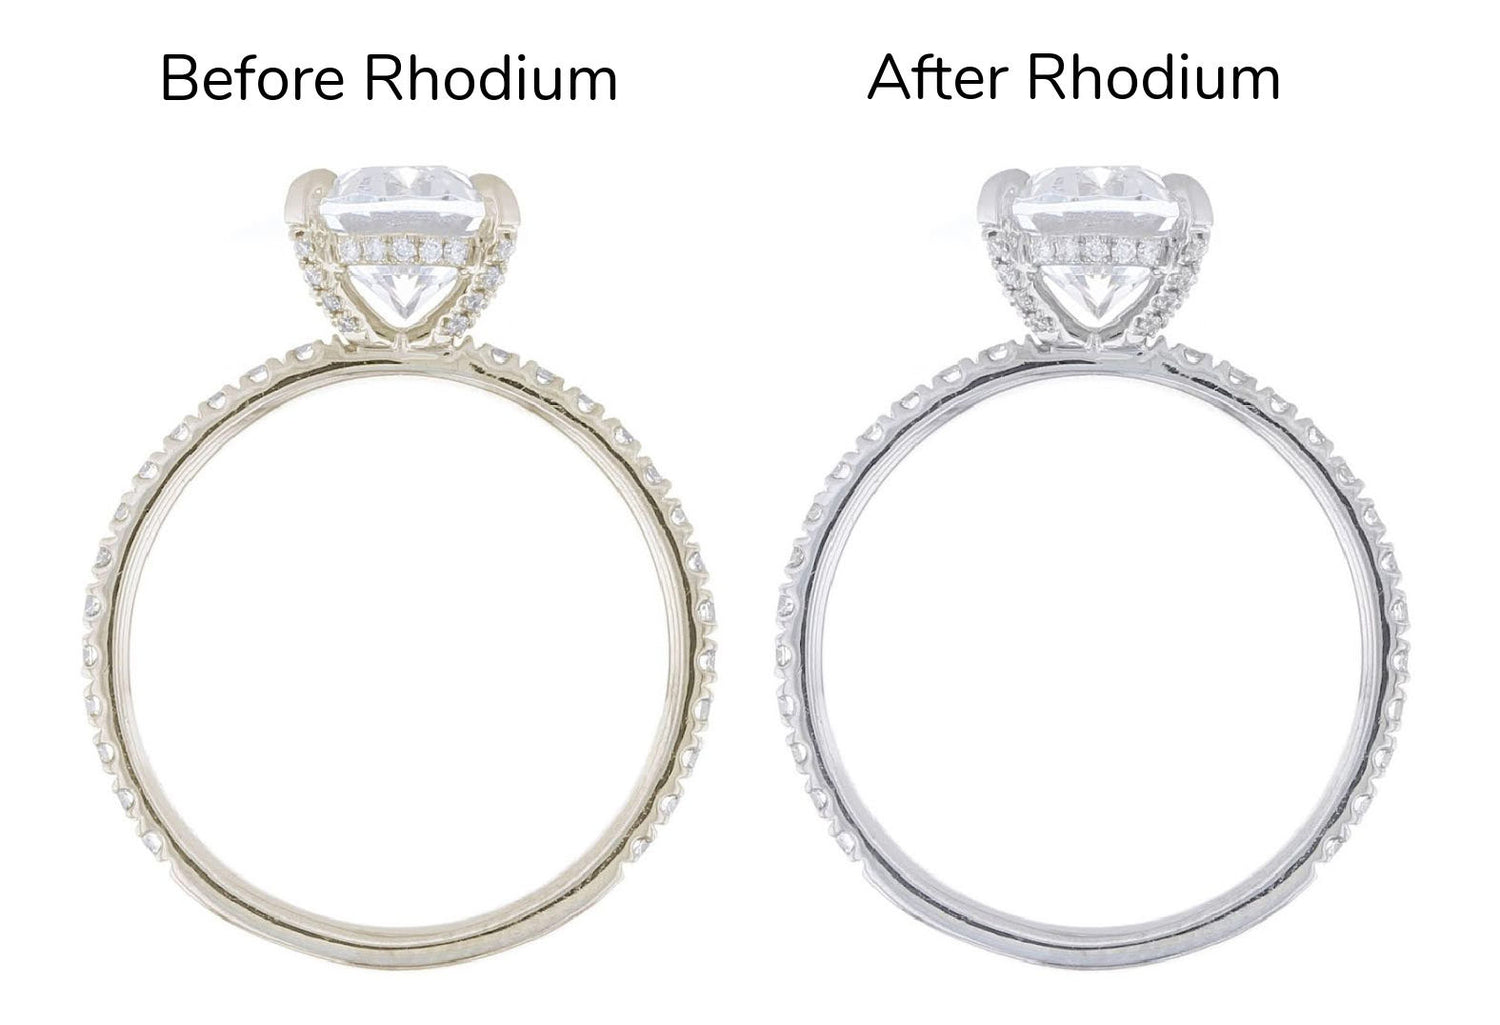 White gold not rhodium plated vs white gold rhodium plated engagement rings